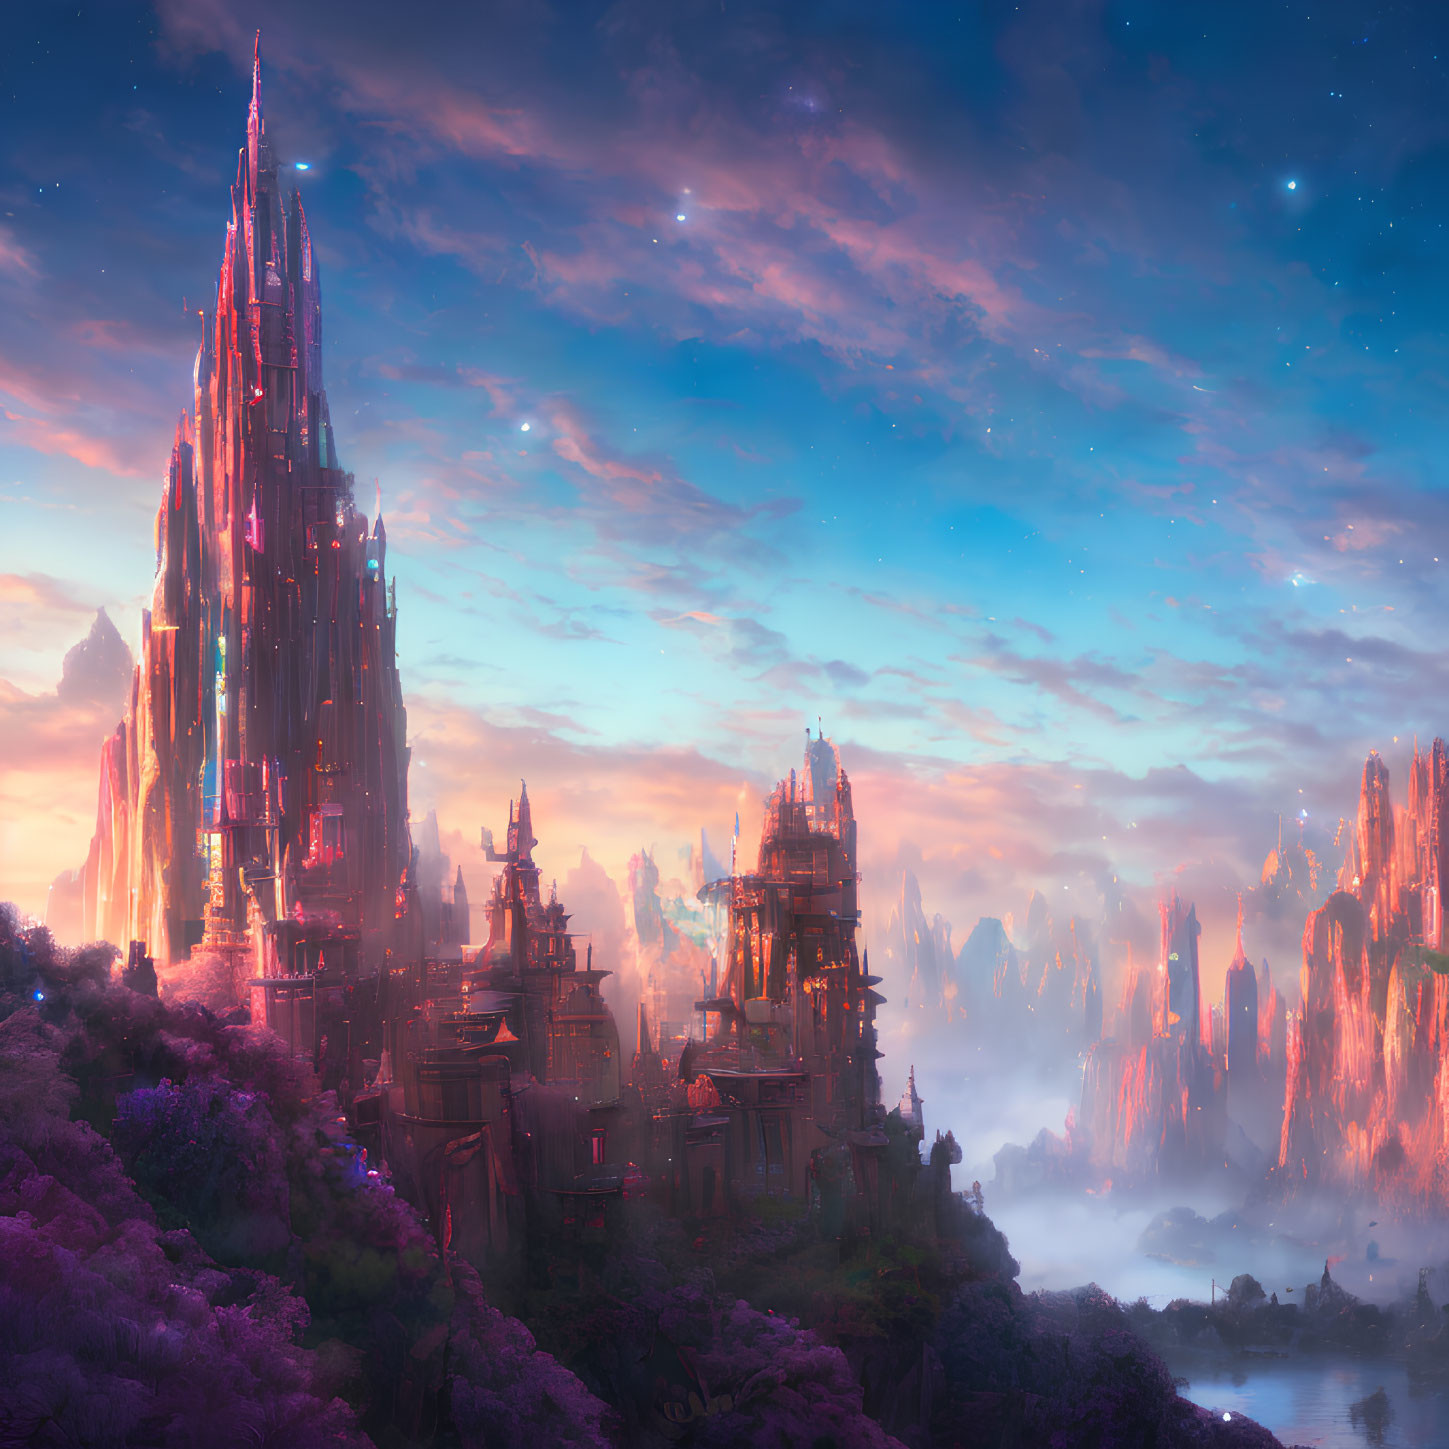 Fantastical landscape with crystal castle, purple fields, cliffs, and sunset sky